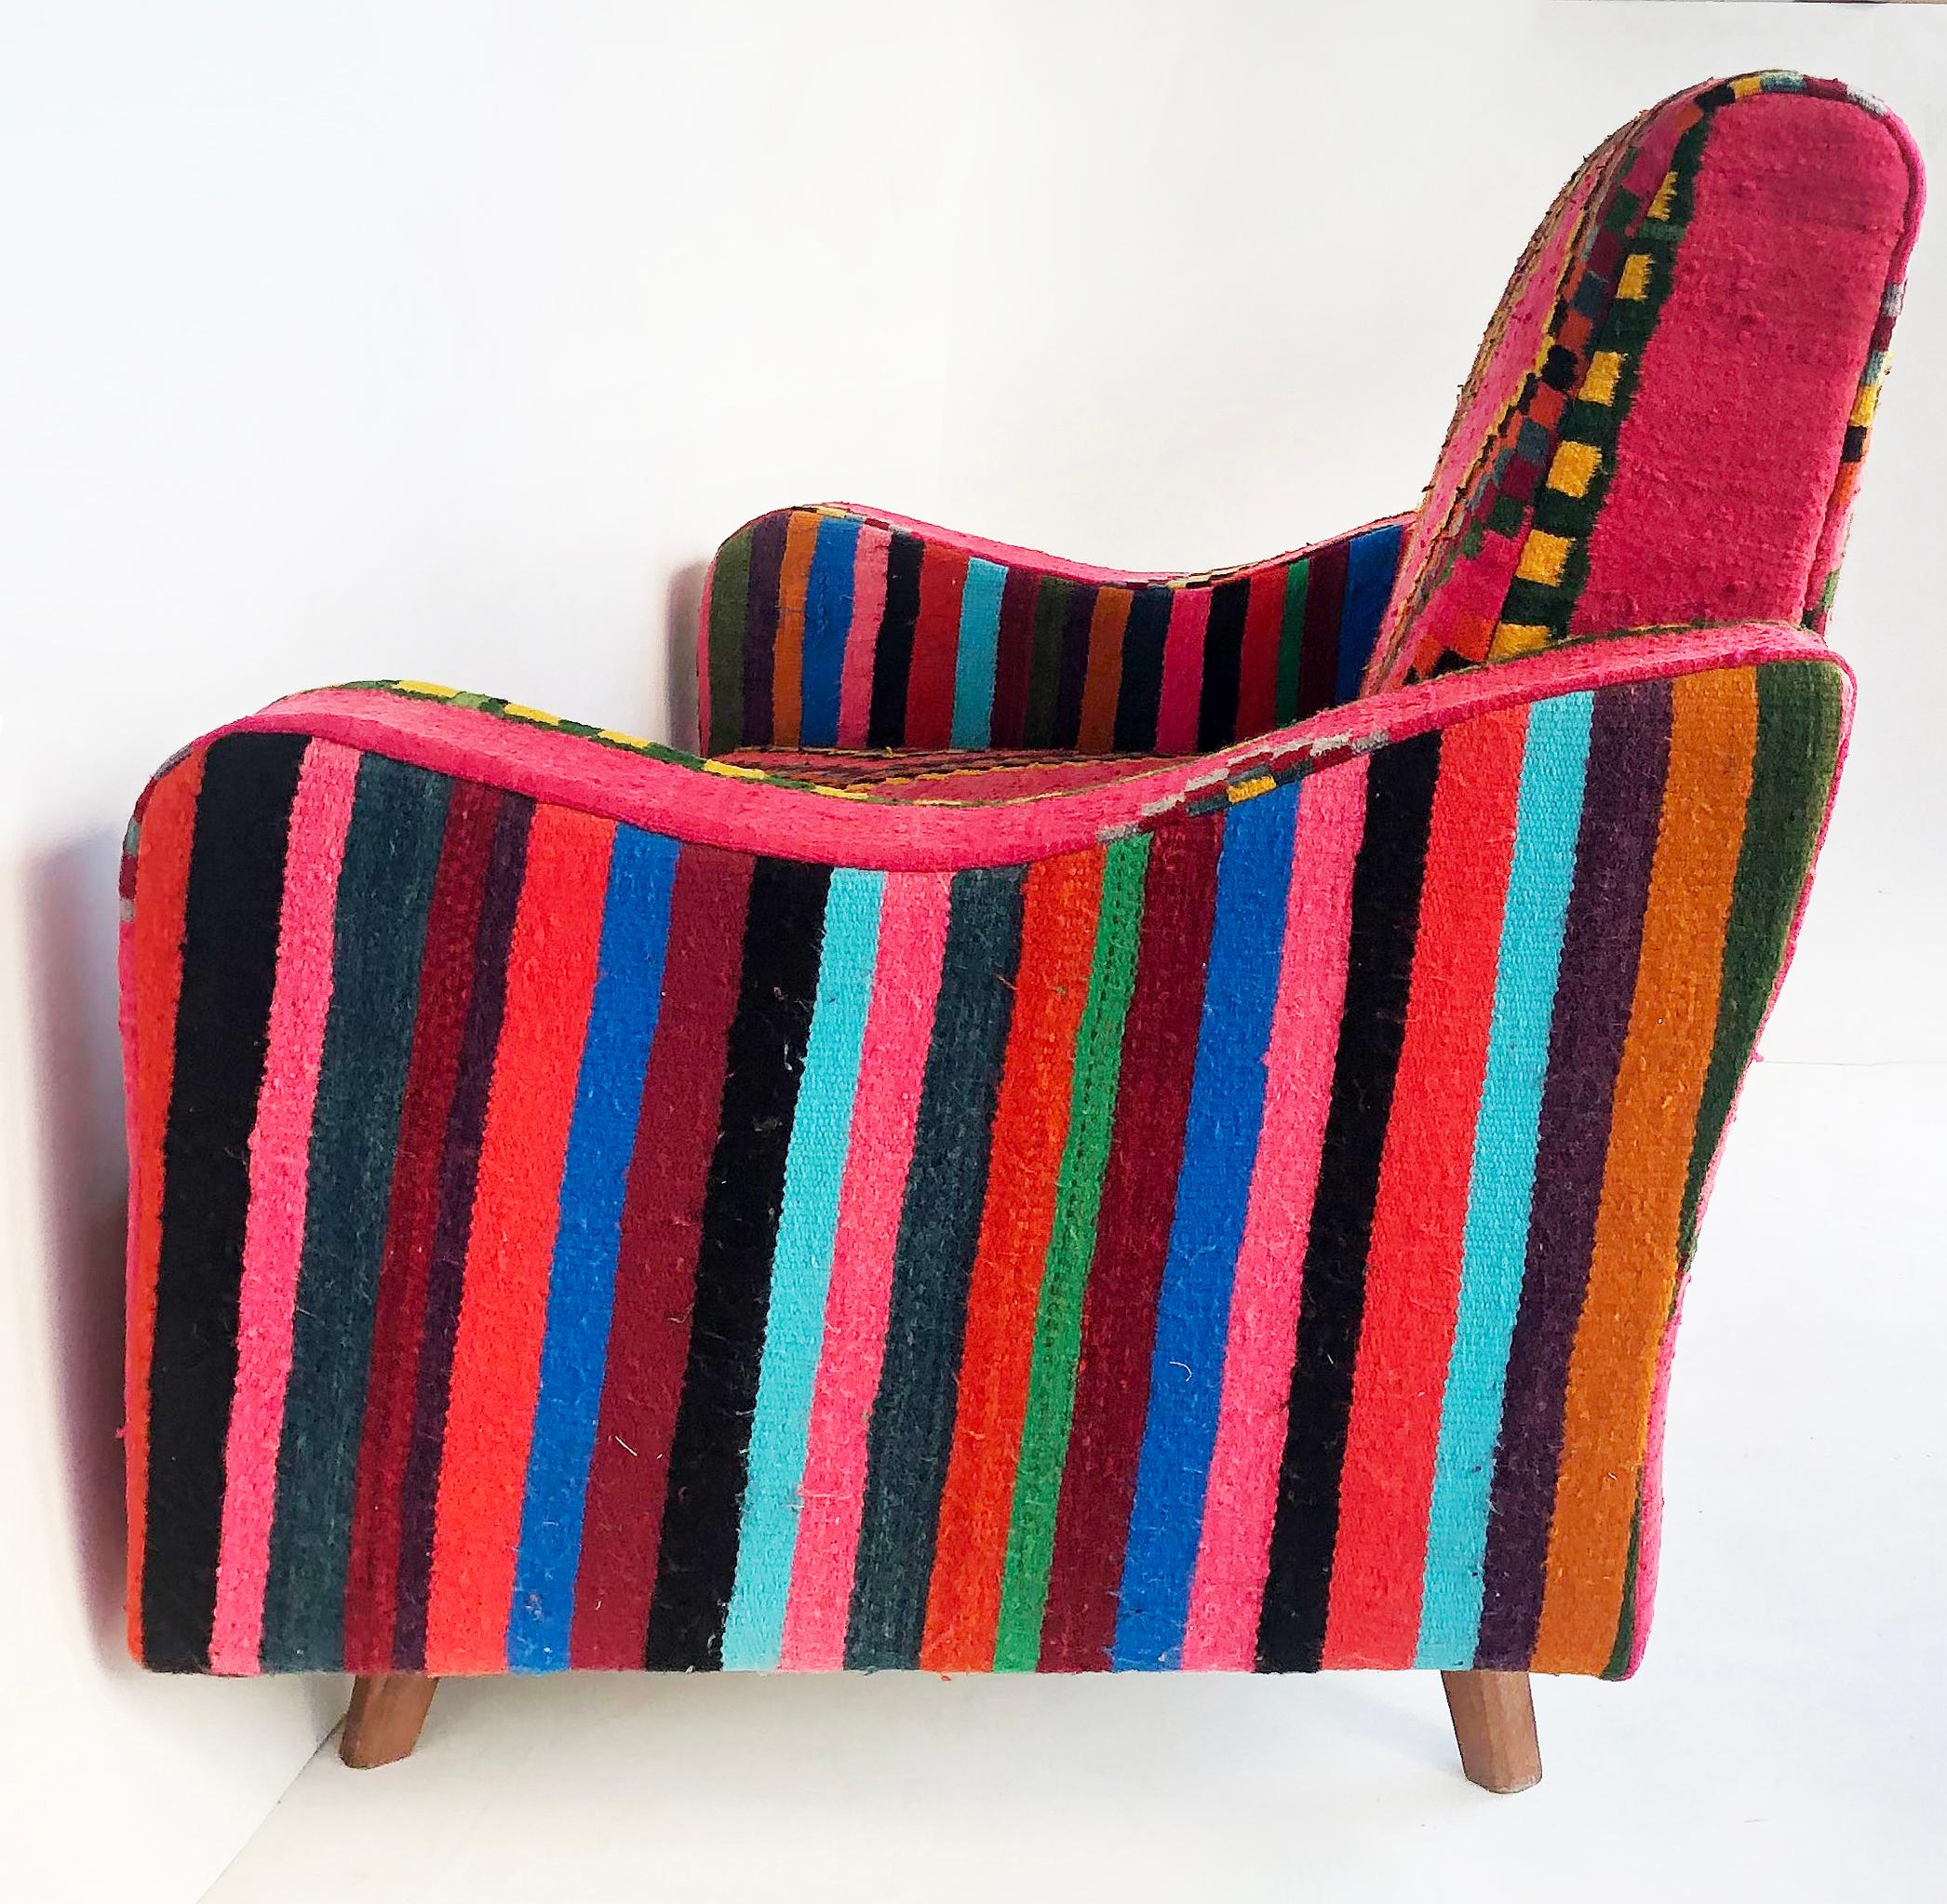 Tribal Tunisian 'North Africa' Woven Wool Textile Loveseat with Brightly Colored Fabric